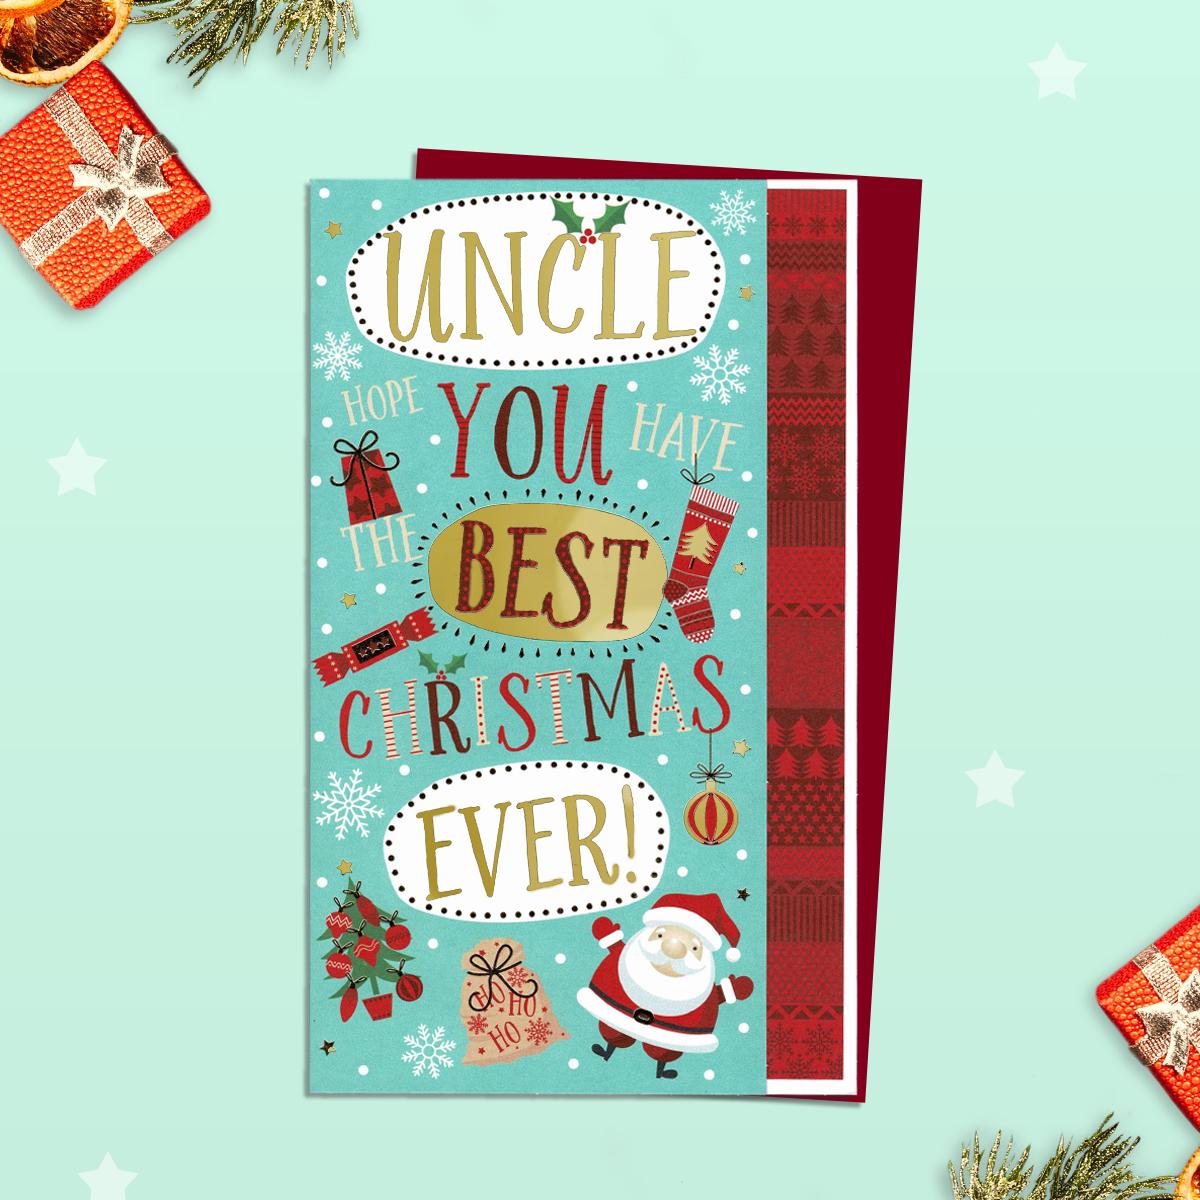 Uncle Christmas Card Alongside Its Red Envelope